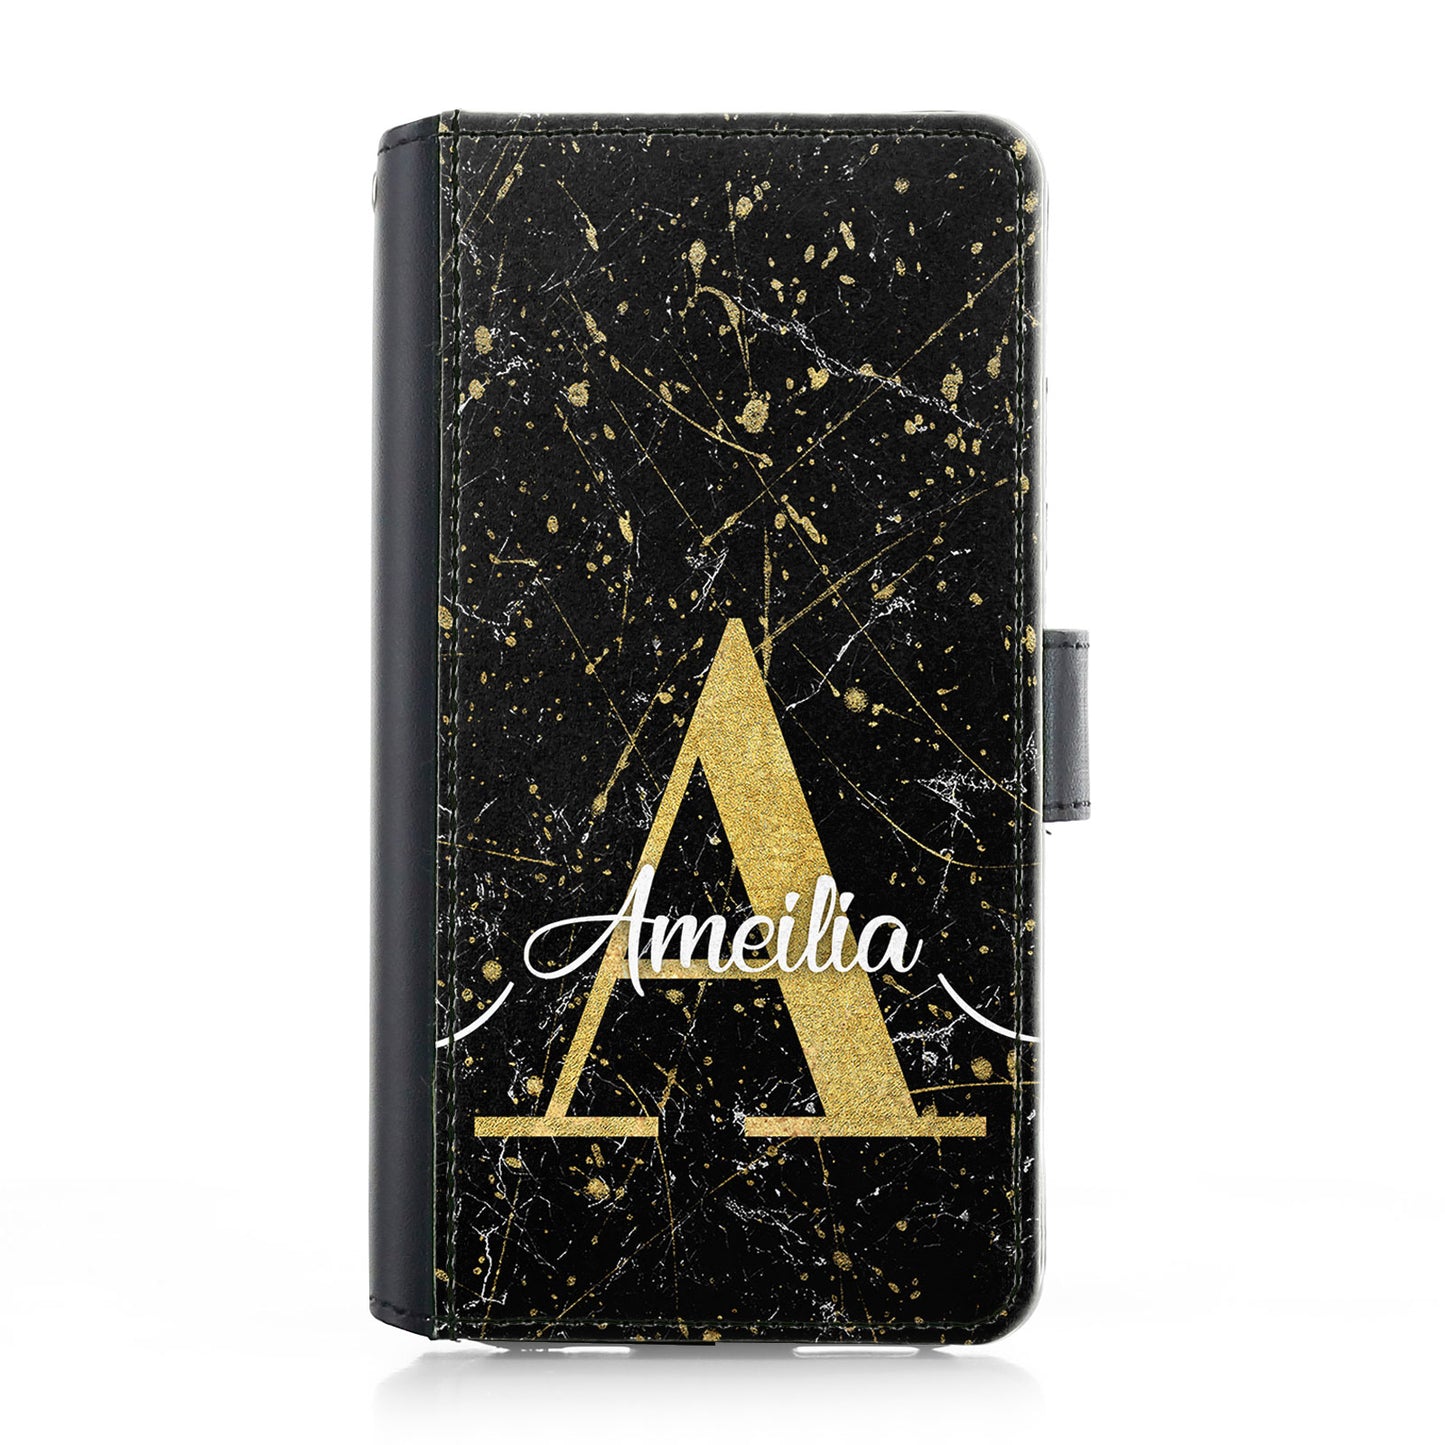 Personalised iPhone Leather Case - Black Speckle Marble and Gold Initial/Name